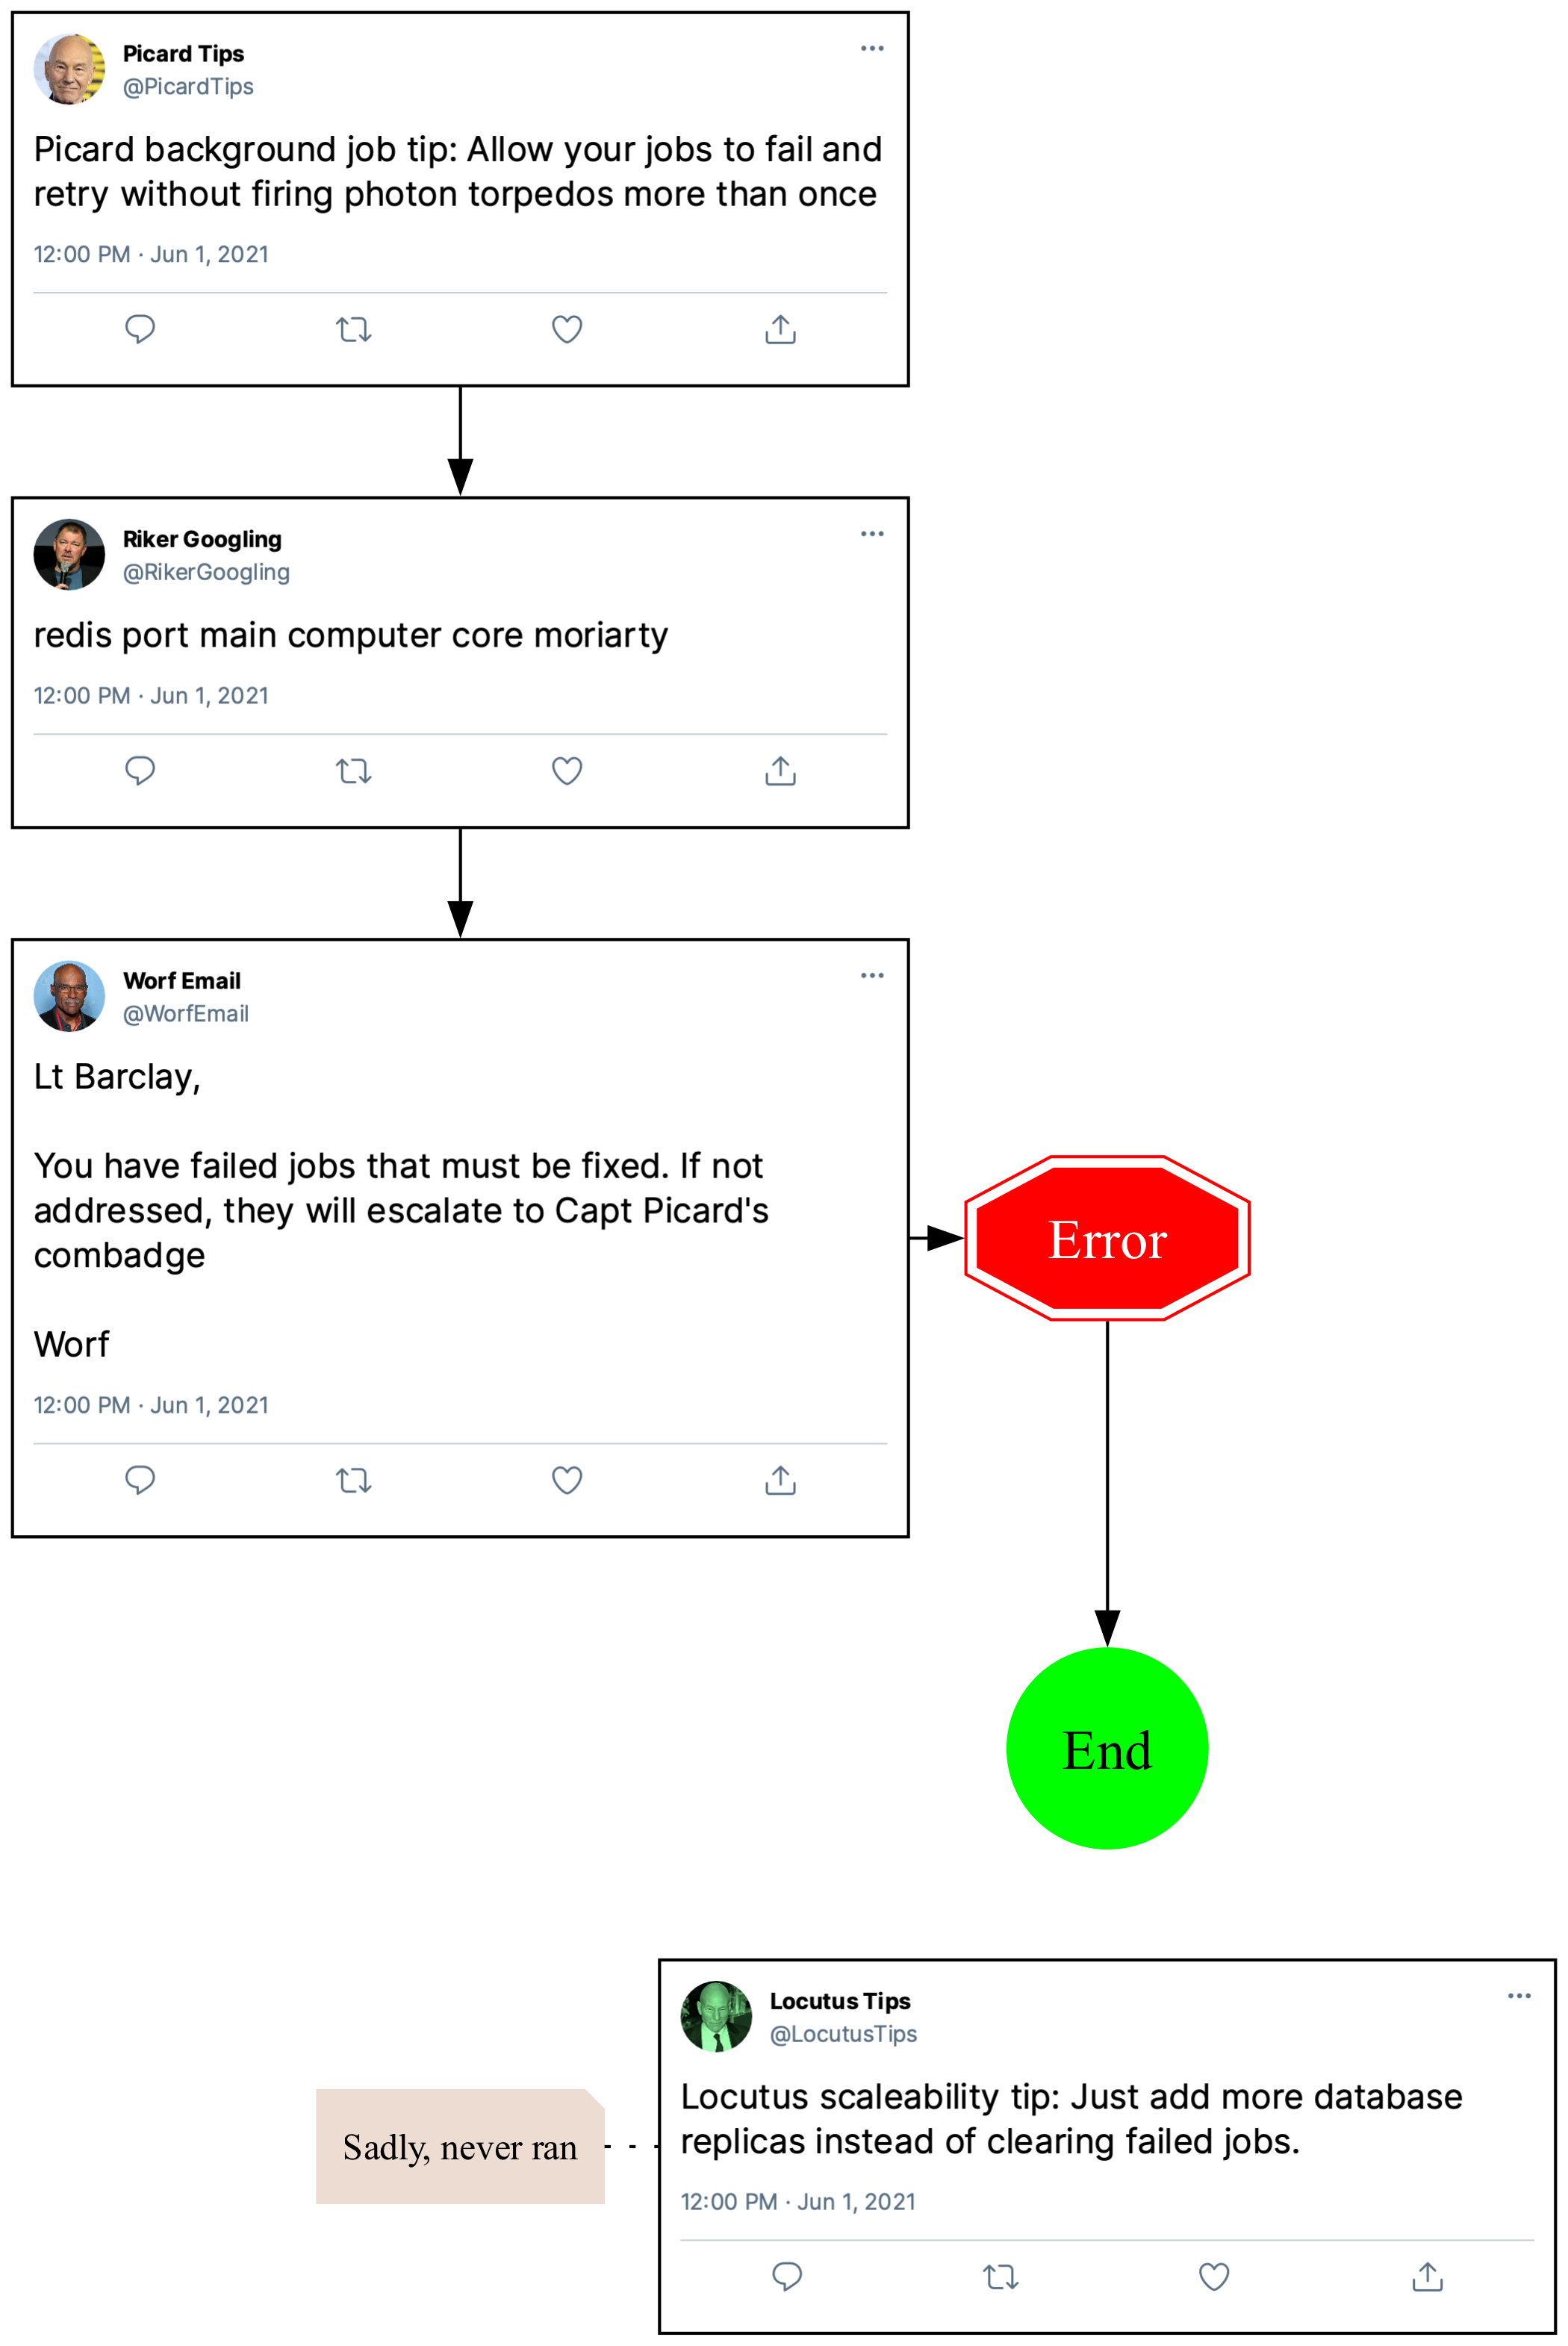 The same four Mastodon posts from before. @PicardTips leads to @RikerGoogling, which leads to @WorfEmail, which leads to an error.  From the error, flow proceeds to the end state. @LocutusTips post is shown with the note 'Sadly, never ran'. The content of the posts is the same as the first image